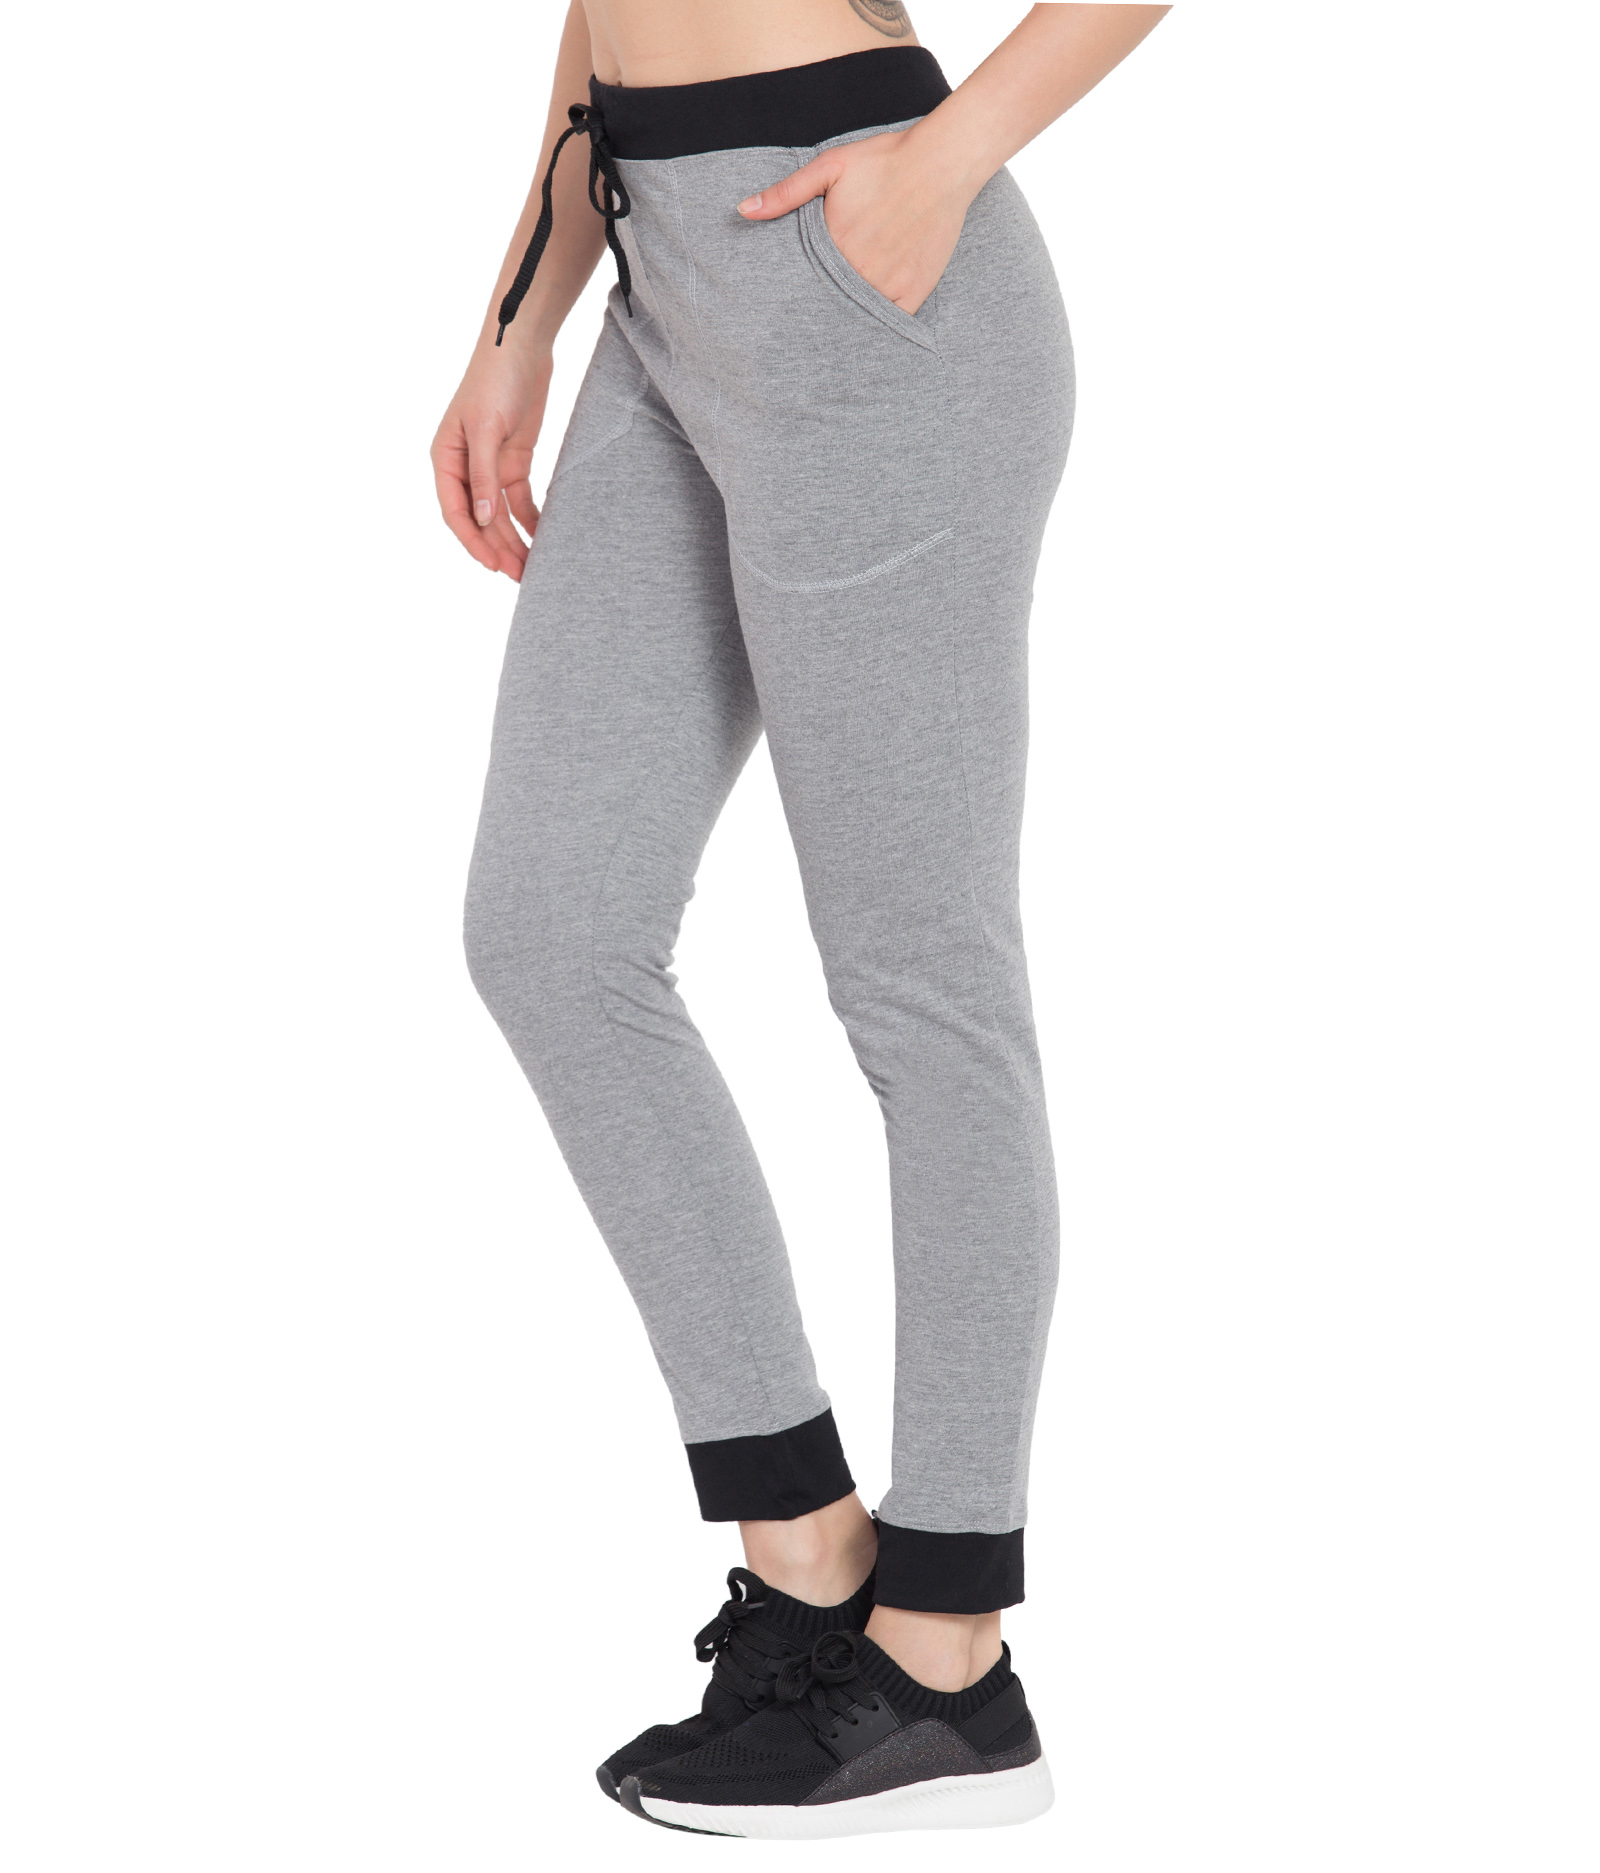 Buy Haoser Cotton track pant for Women sports, Daily wear track pants ...